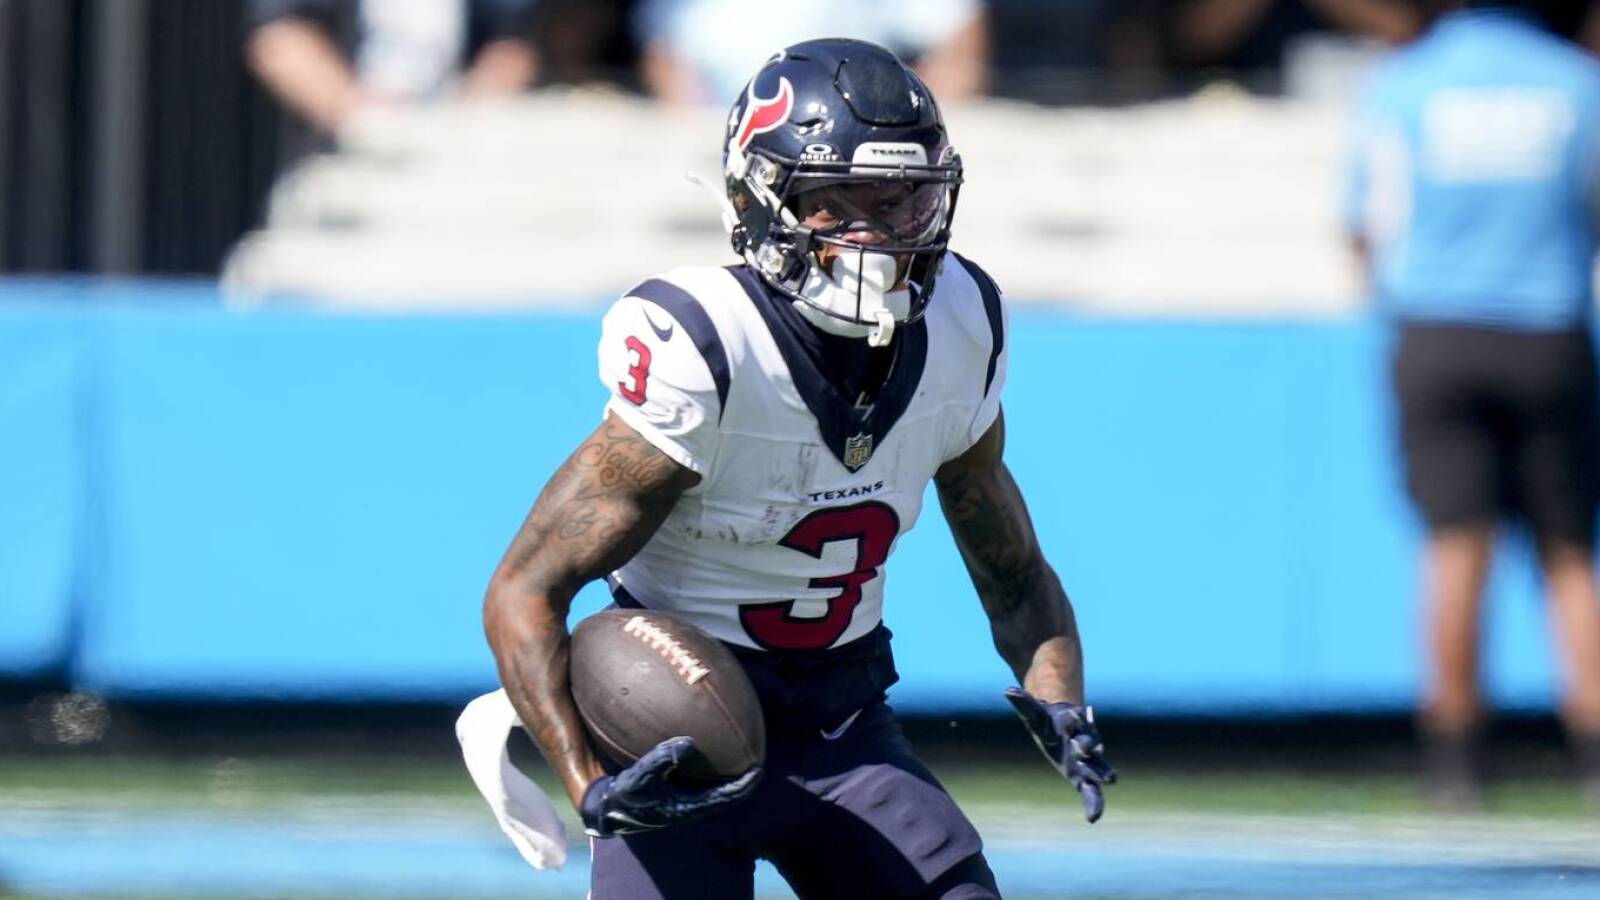 Texans' Tank Dell progressing in recovery from gunshot wound